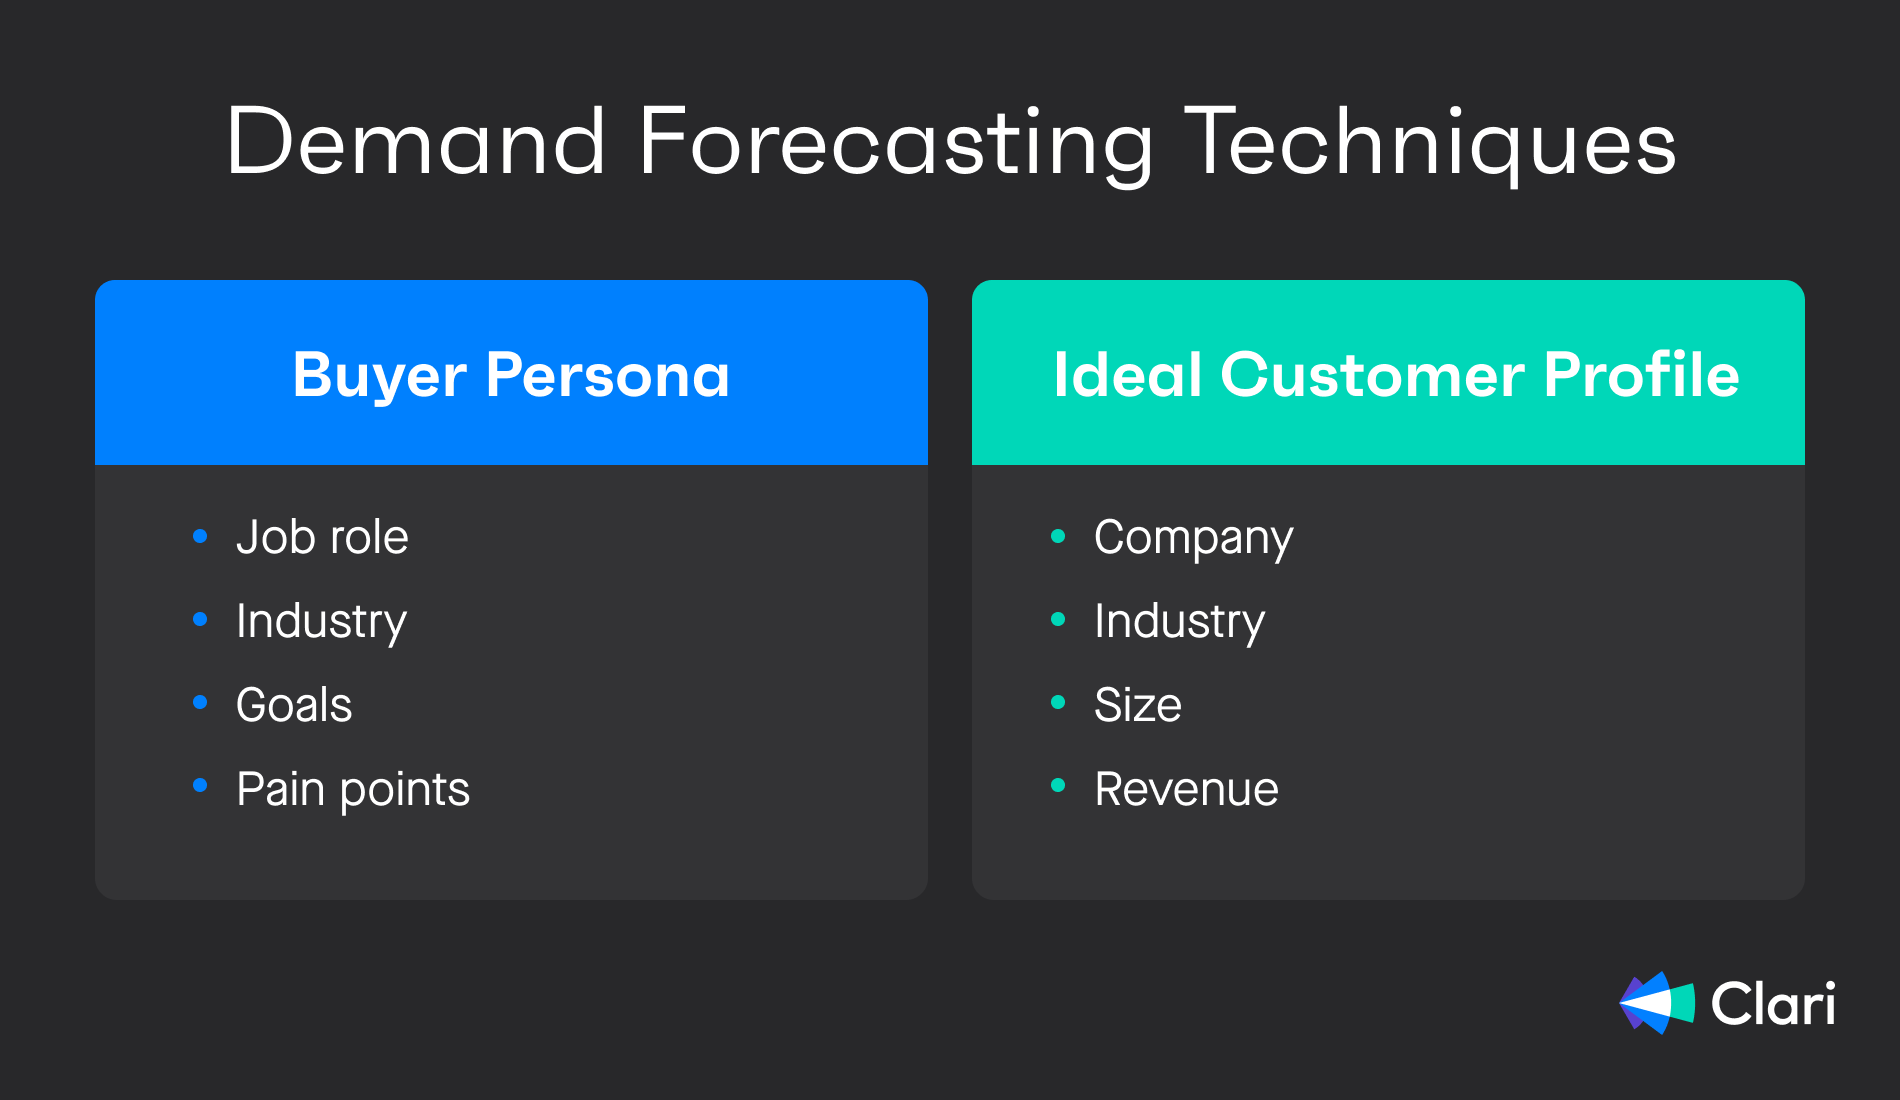 Buyer personas and ideal customer profiles